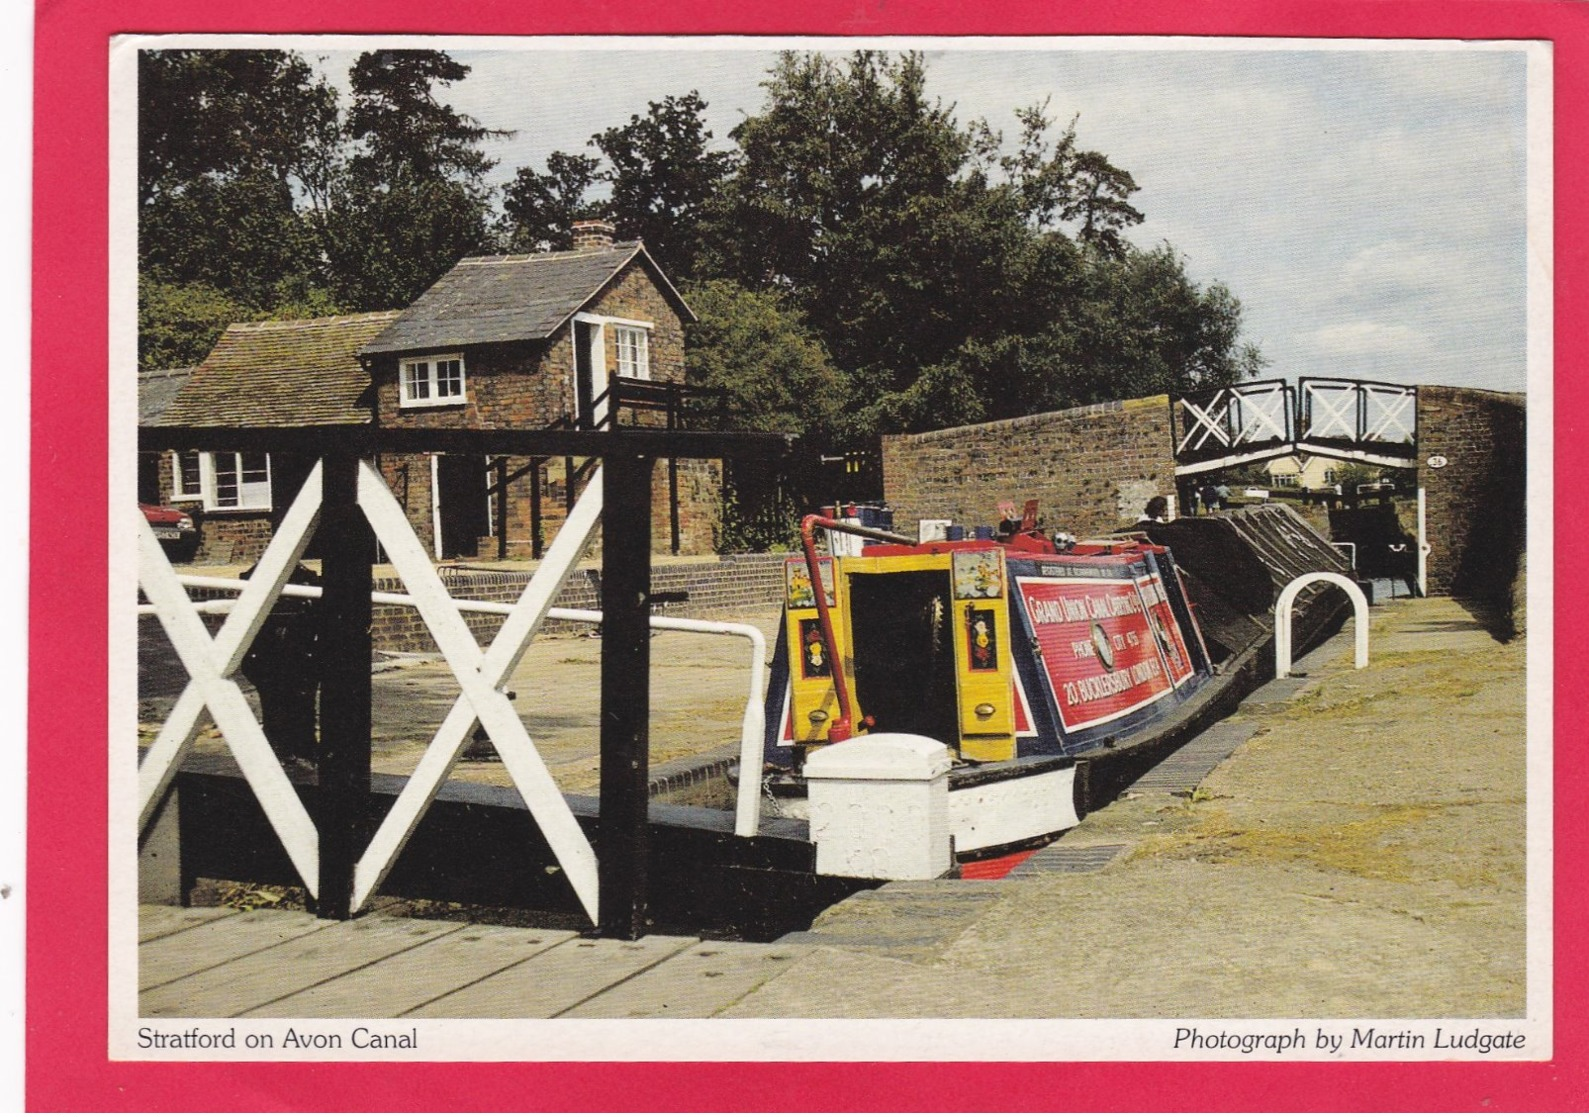 Modern Post Card Of Transport,Canal Boats,Canal Barge,Fulbourne,Lapworth Locks,Stratford On Avon CanalX38. - Houseboats